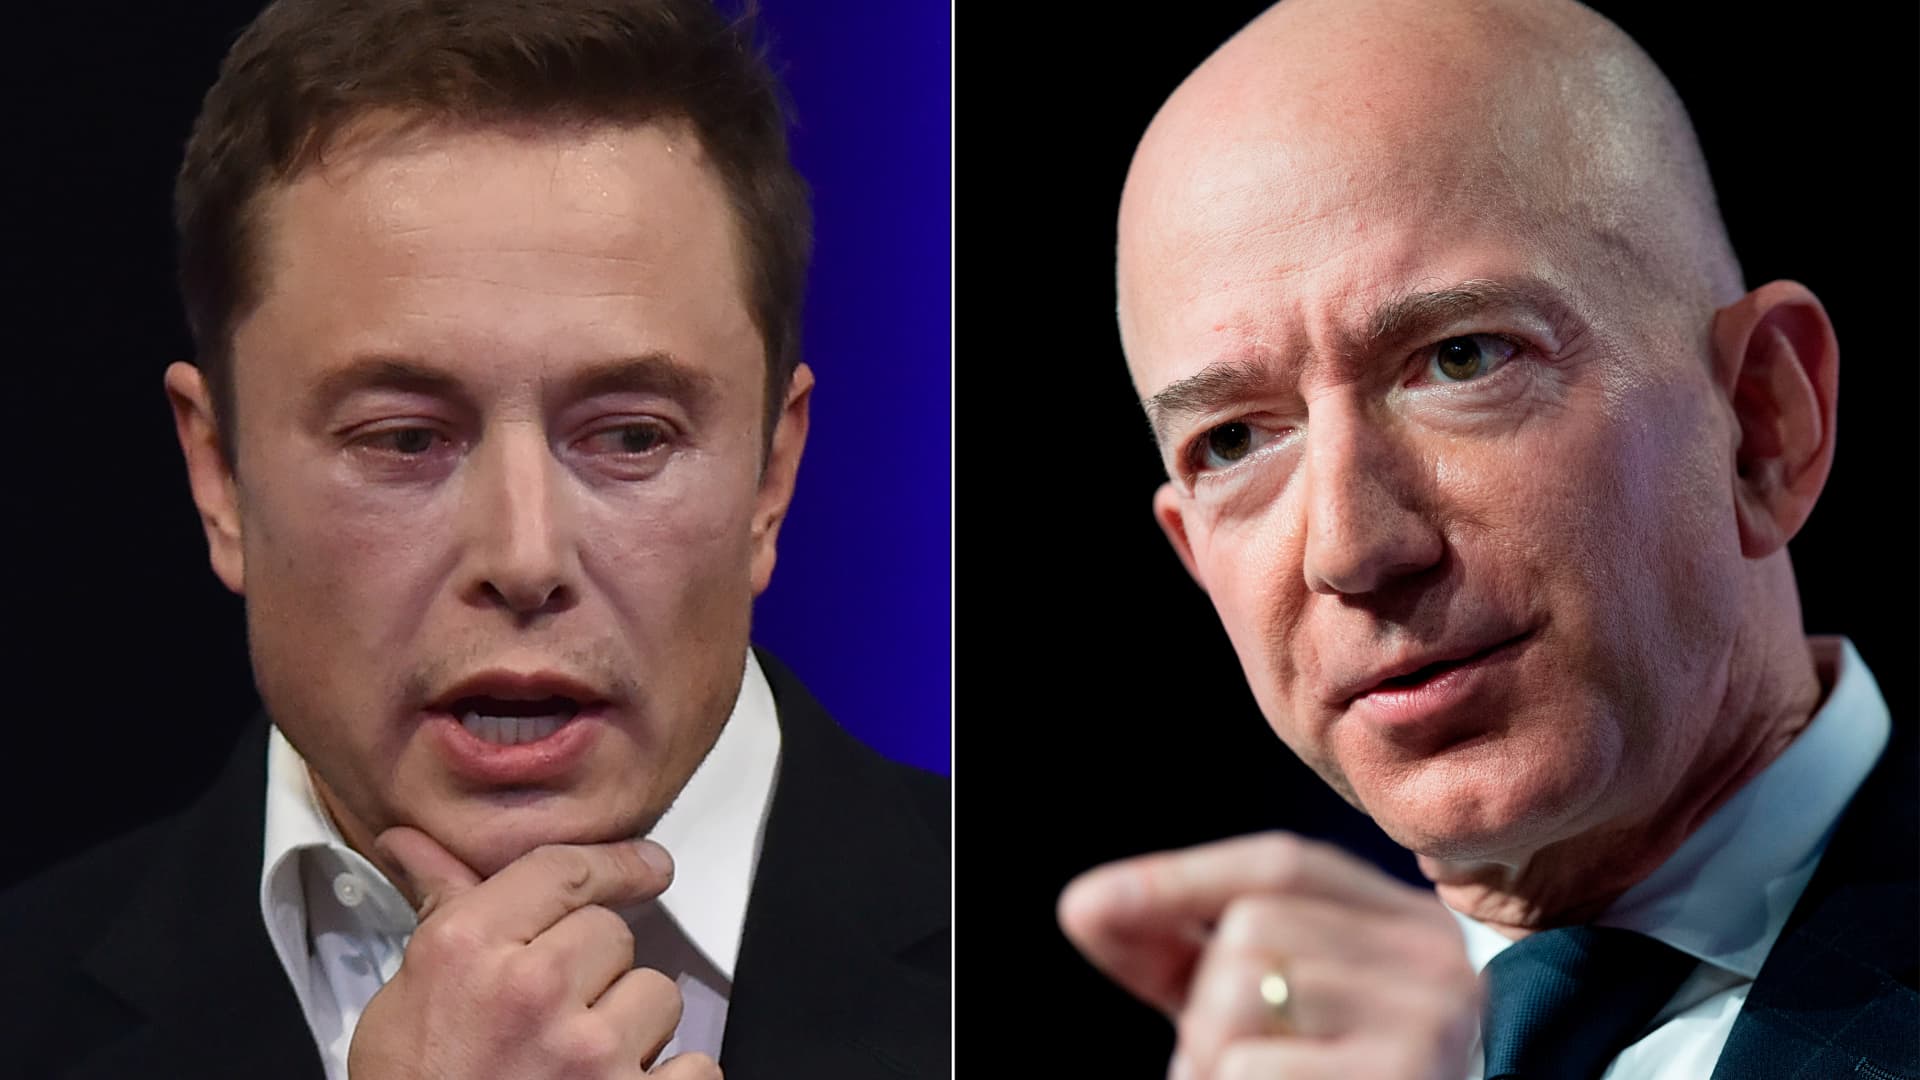 Bezos snubbed Musk, SpaceX over satellite contract: Lawsuit